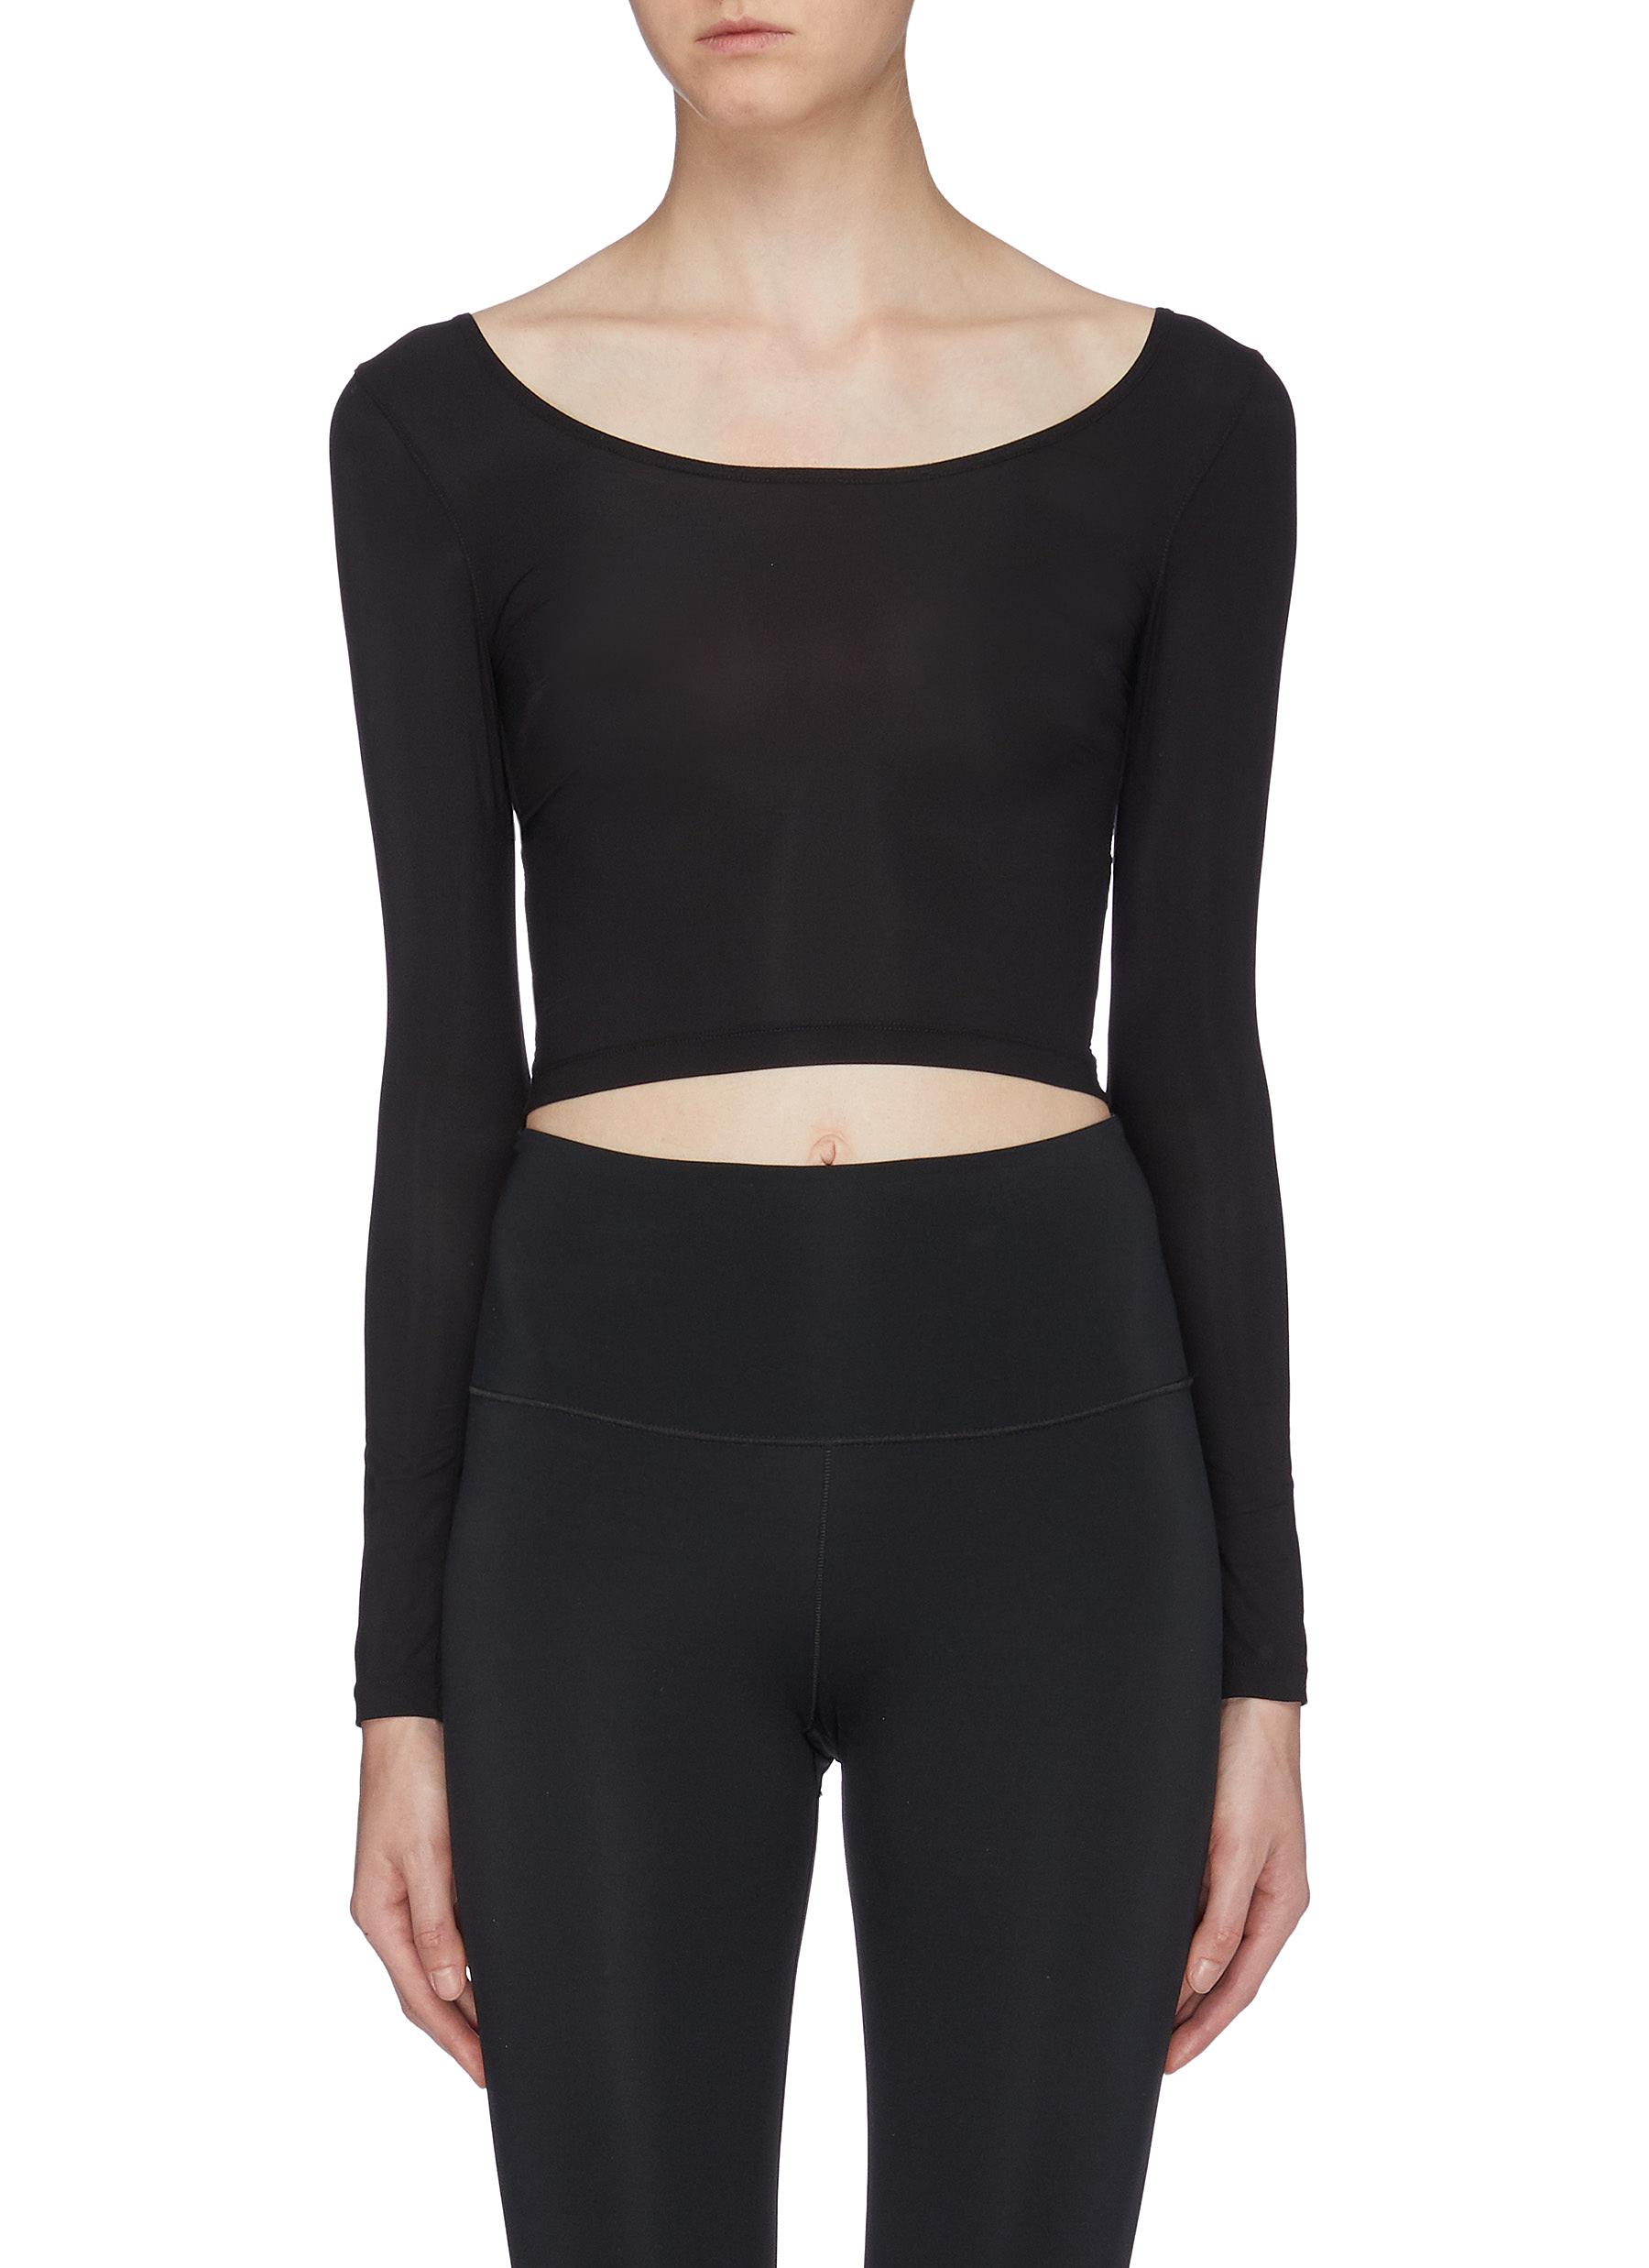 Performance cropped long sleeve T-shirt by Wone